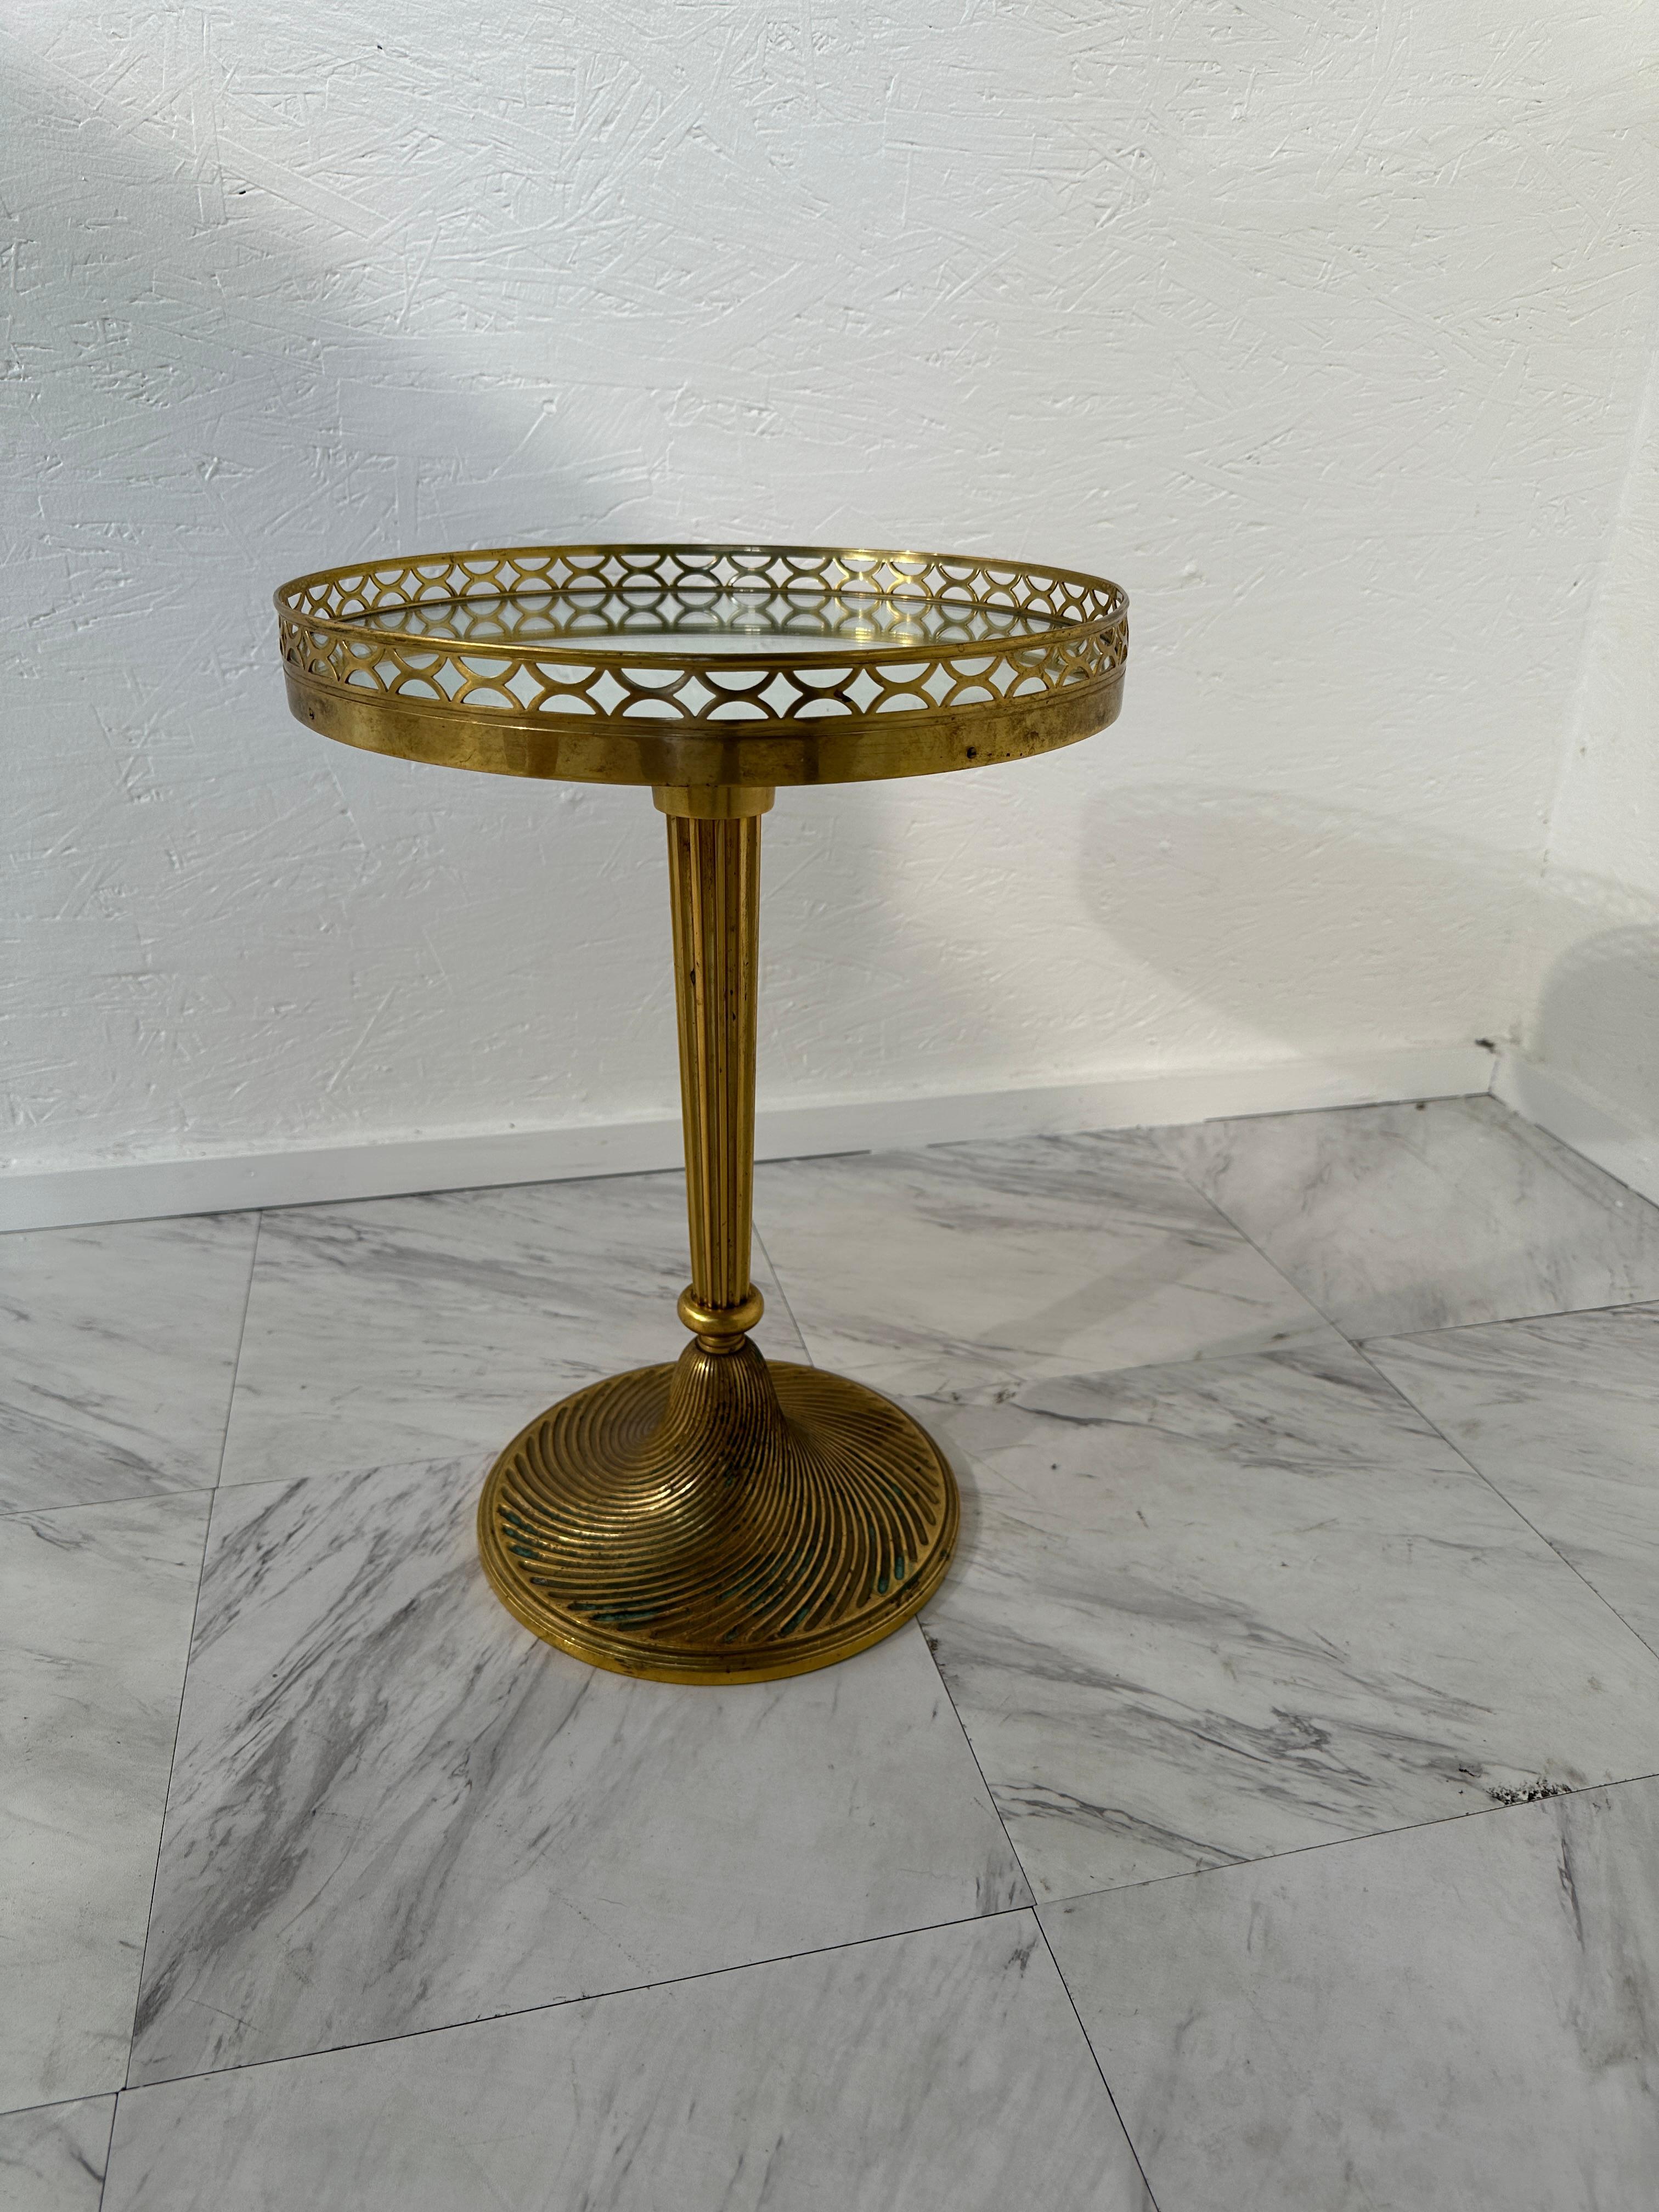 The Mid Century Italian Round Brass Side Table from the 1960s is a stylish and iconic piece that embodies the design ethos of the mid-century modern era. Crafted with a round top, this side table features a lustrous brass finish, providing a touch